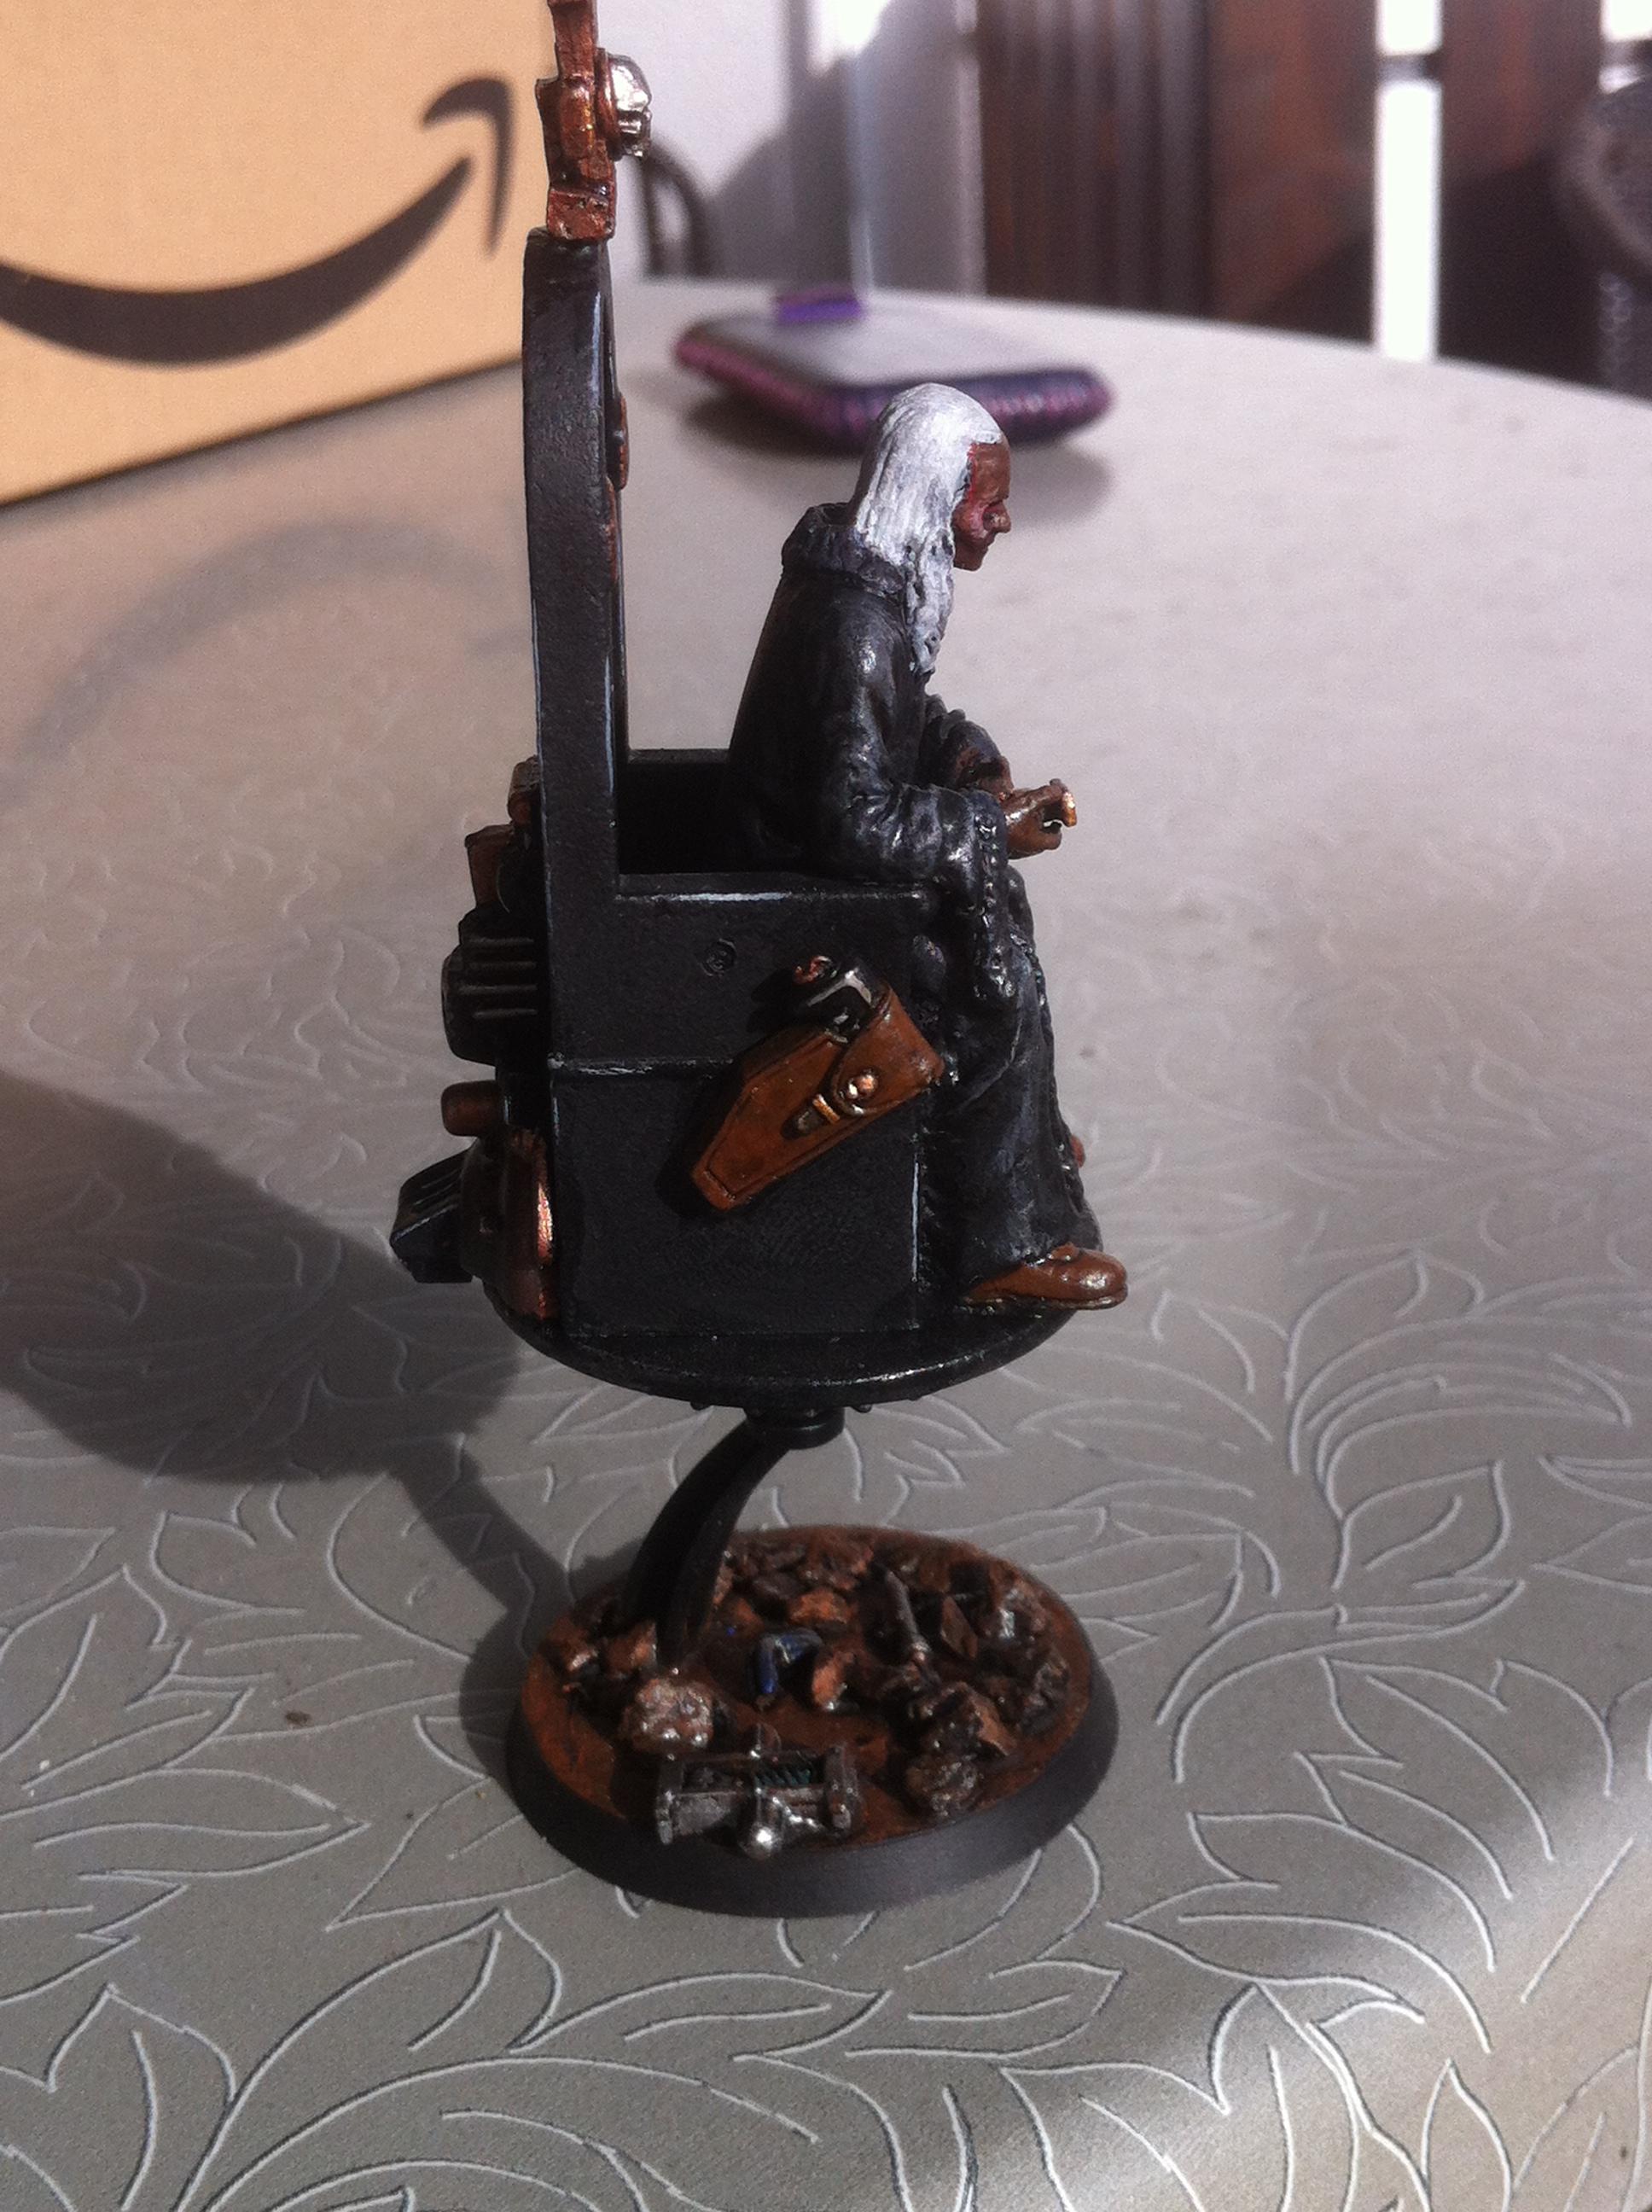 54mm, Chair, Conversion, Flying, Hover, Inquisitor, Karamasov, Karamasow, Old, Roleplay, Scratch